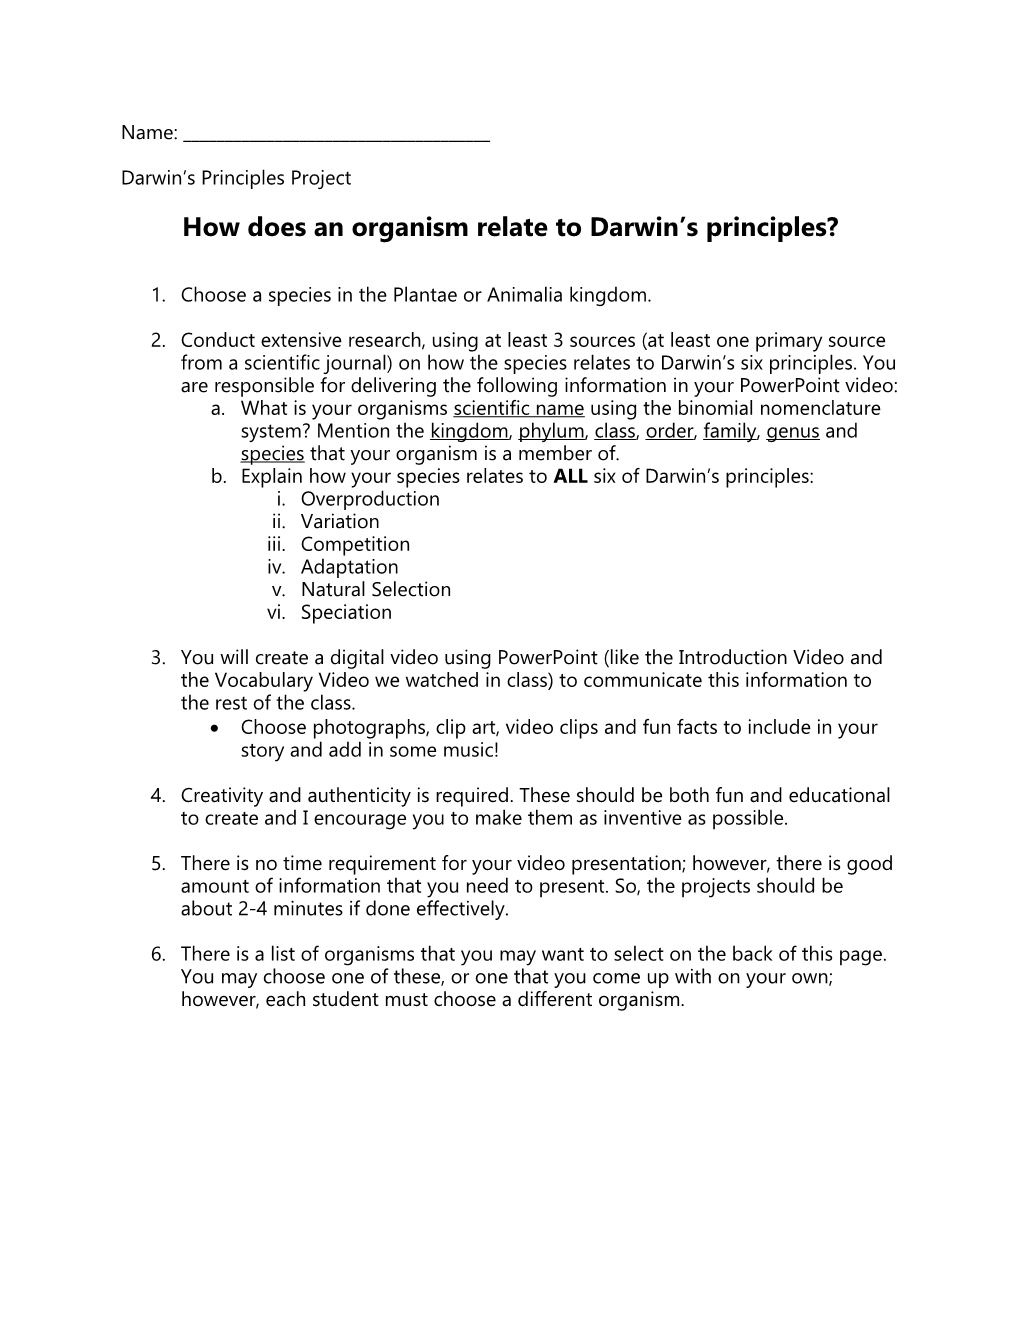 How Does an Organism Relate to Darwin S Principles?